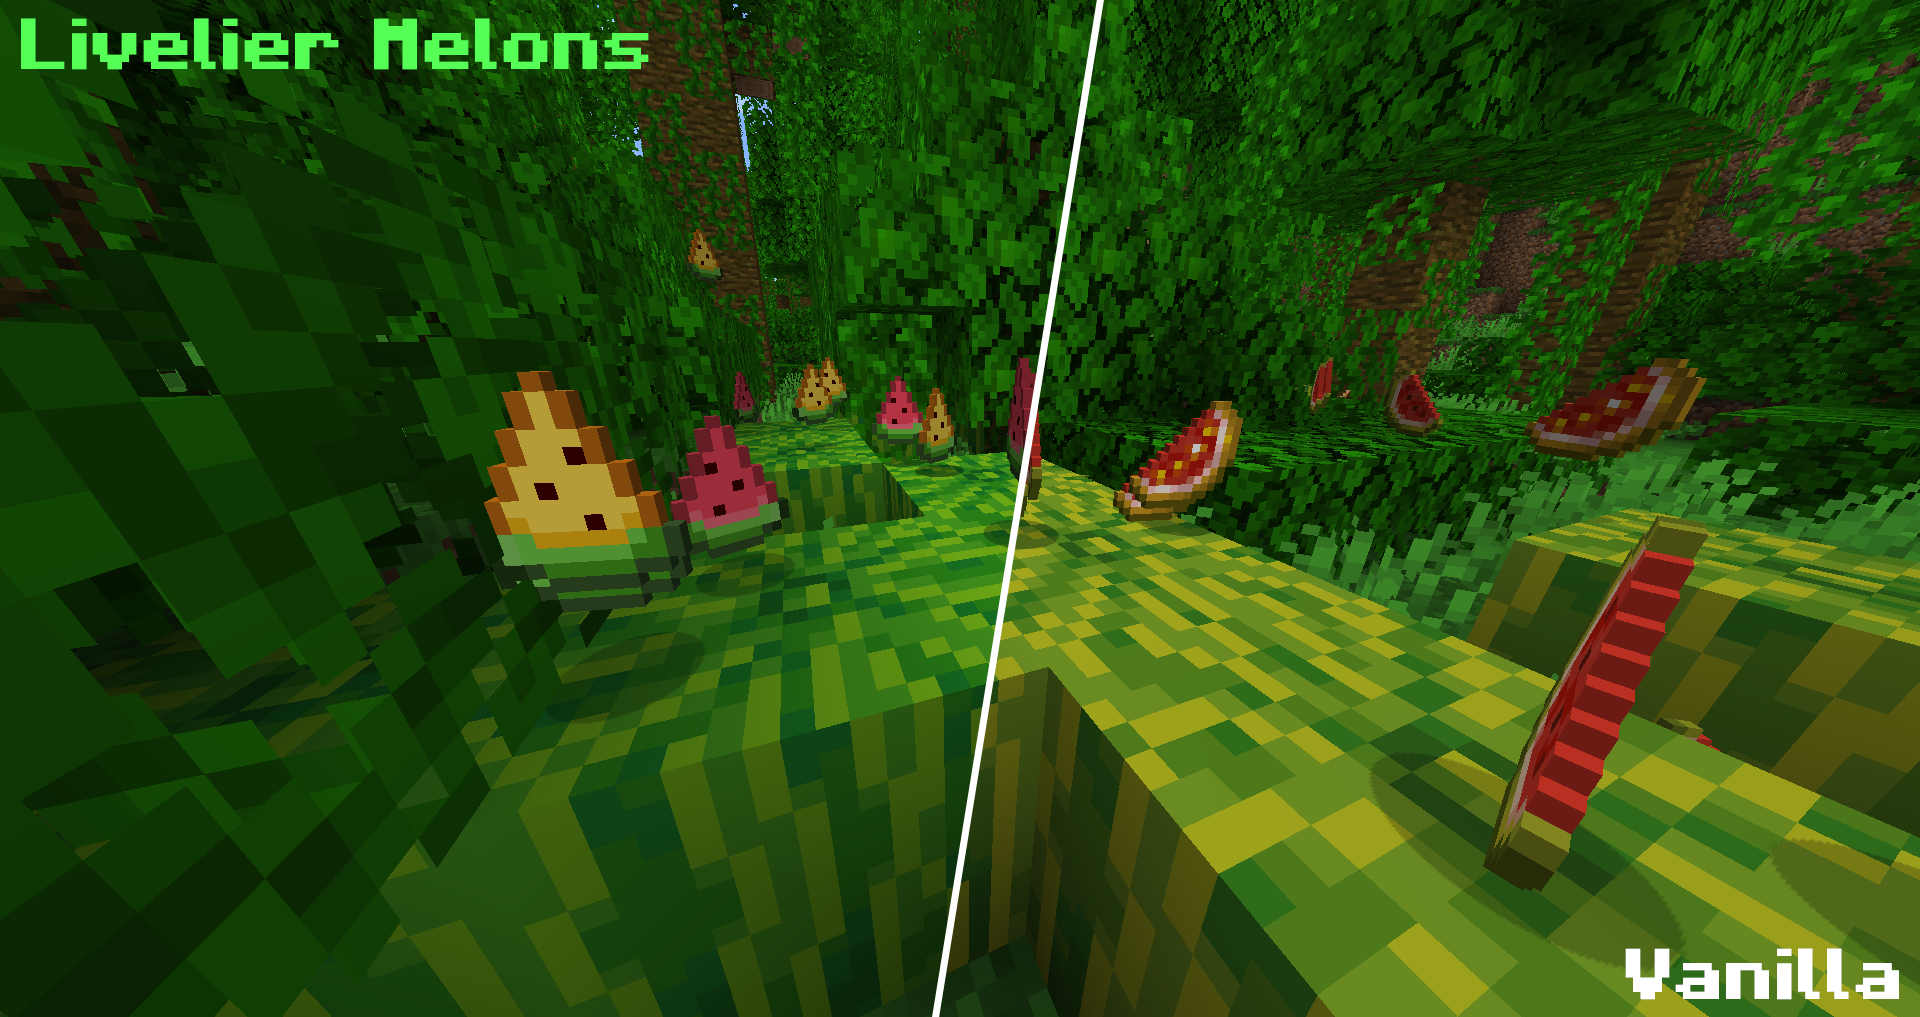 Left: Melon Blocks, Melon Slices, and Glistering Melon Slices with Livelier Melons ON
Right: Melon Blocks, Melon Slices, and Glistering Melon Slices with Livelier Melons OFF